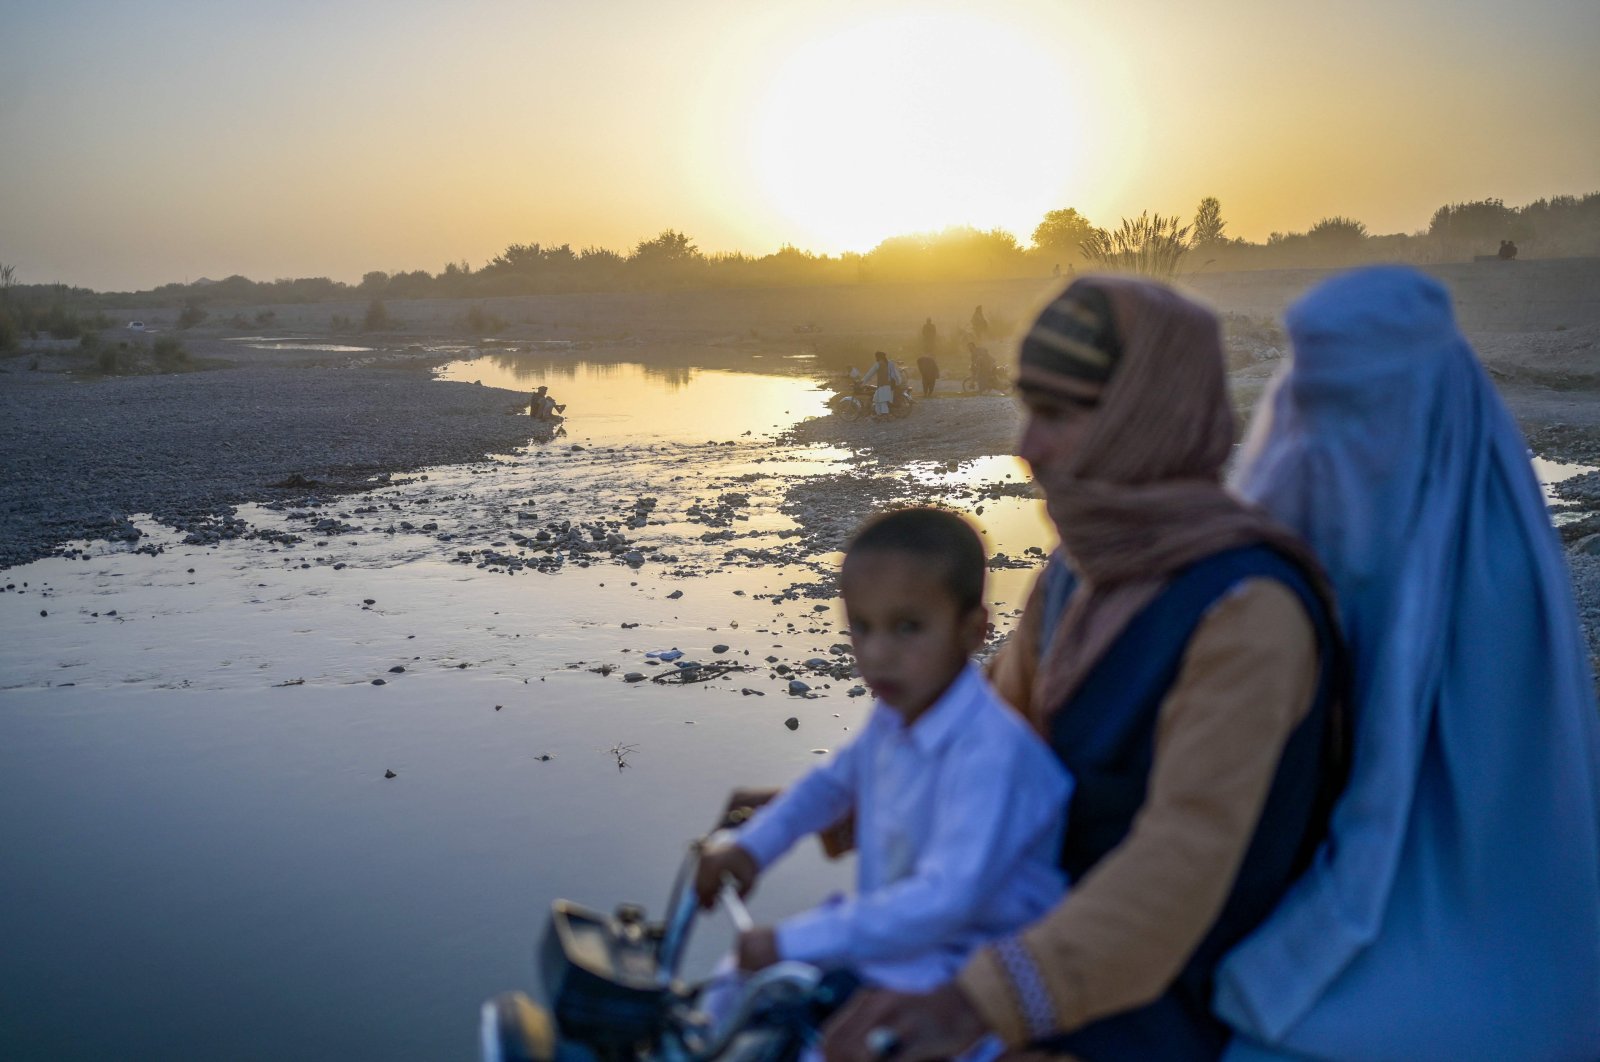 A family rides past a river on a motorcycle in Kandahar, Afghanistan, Sept. 23, 2021. (AFP Photo)